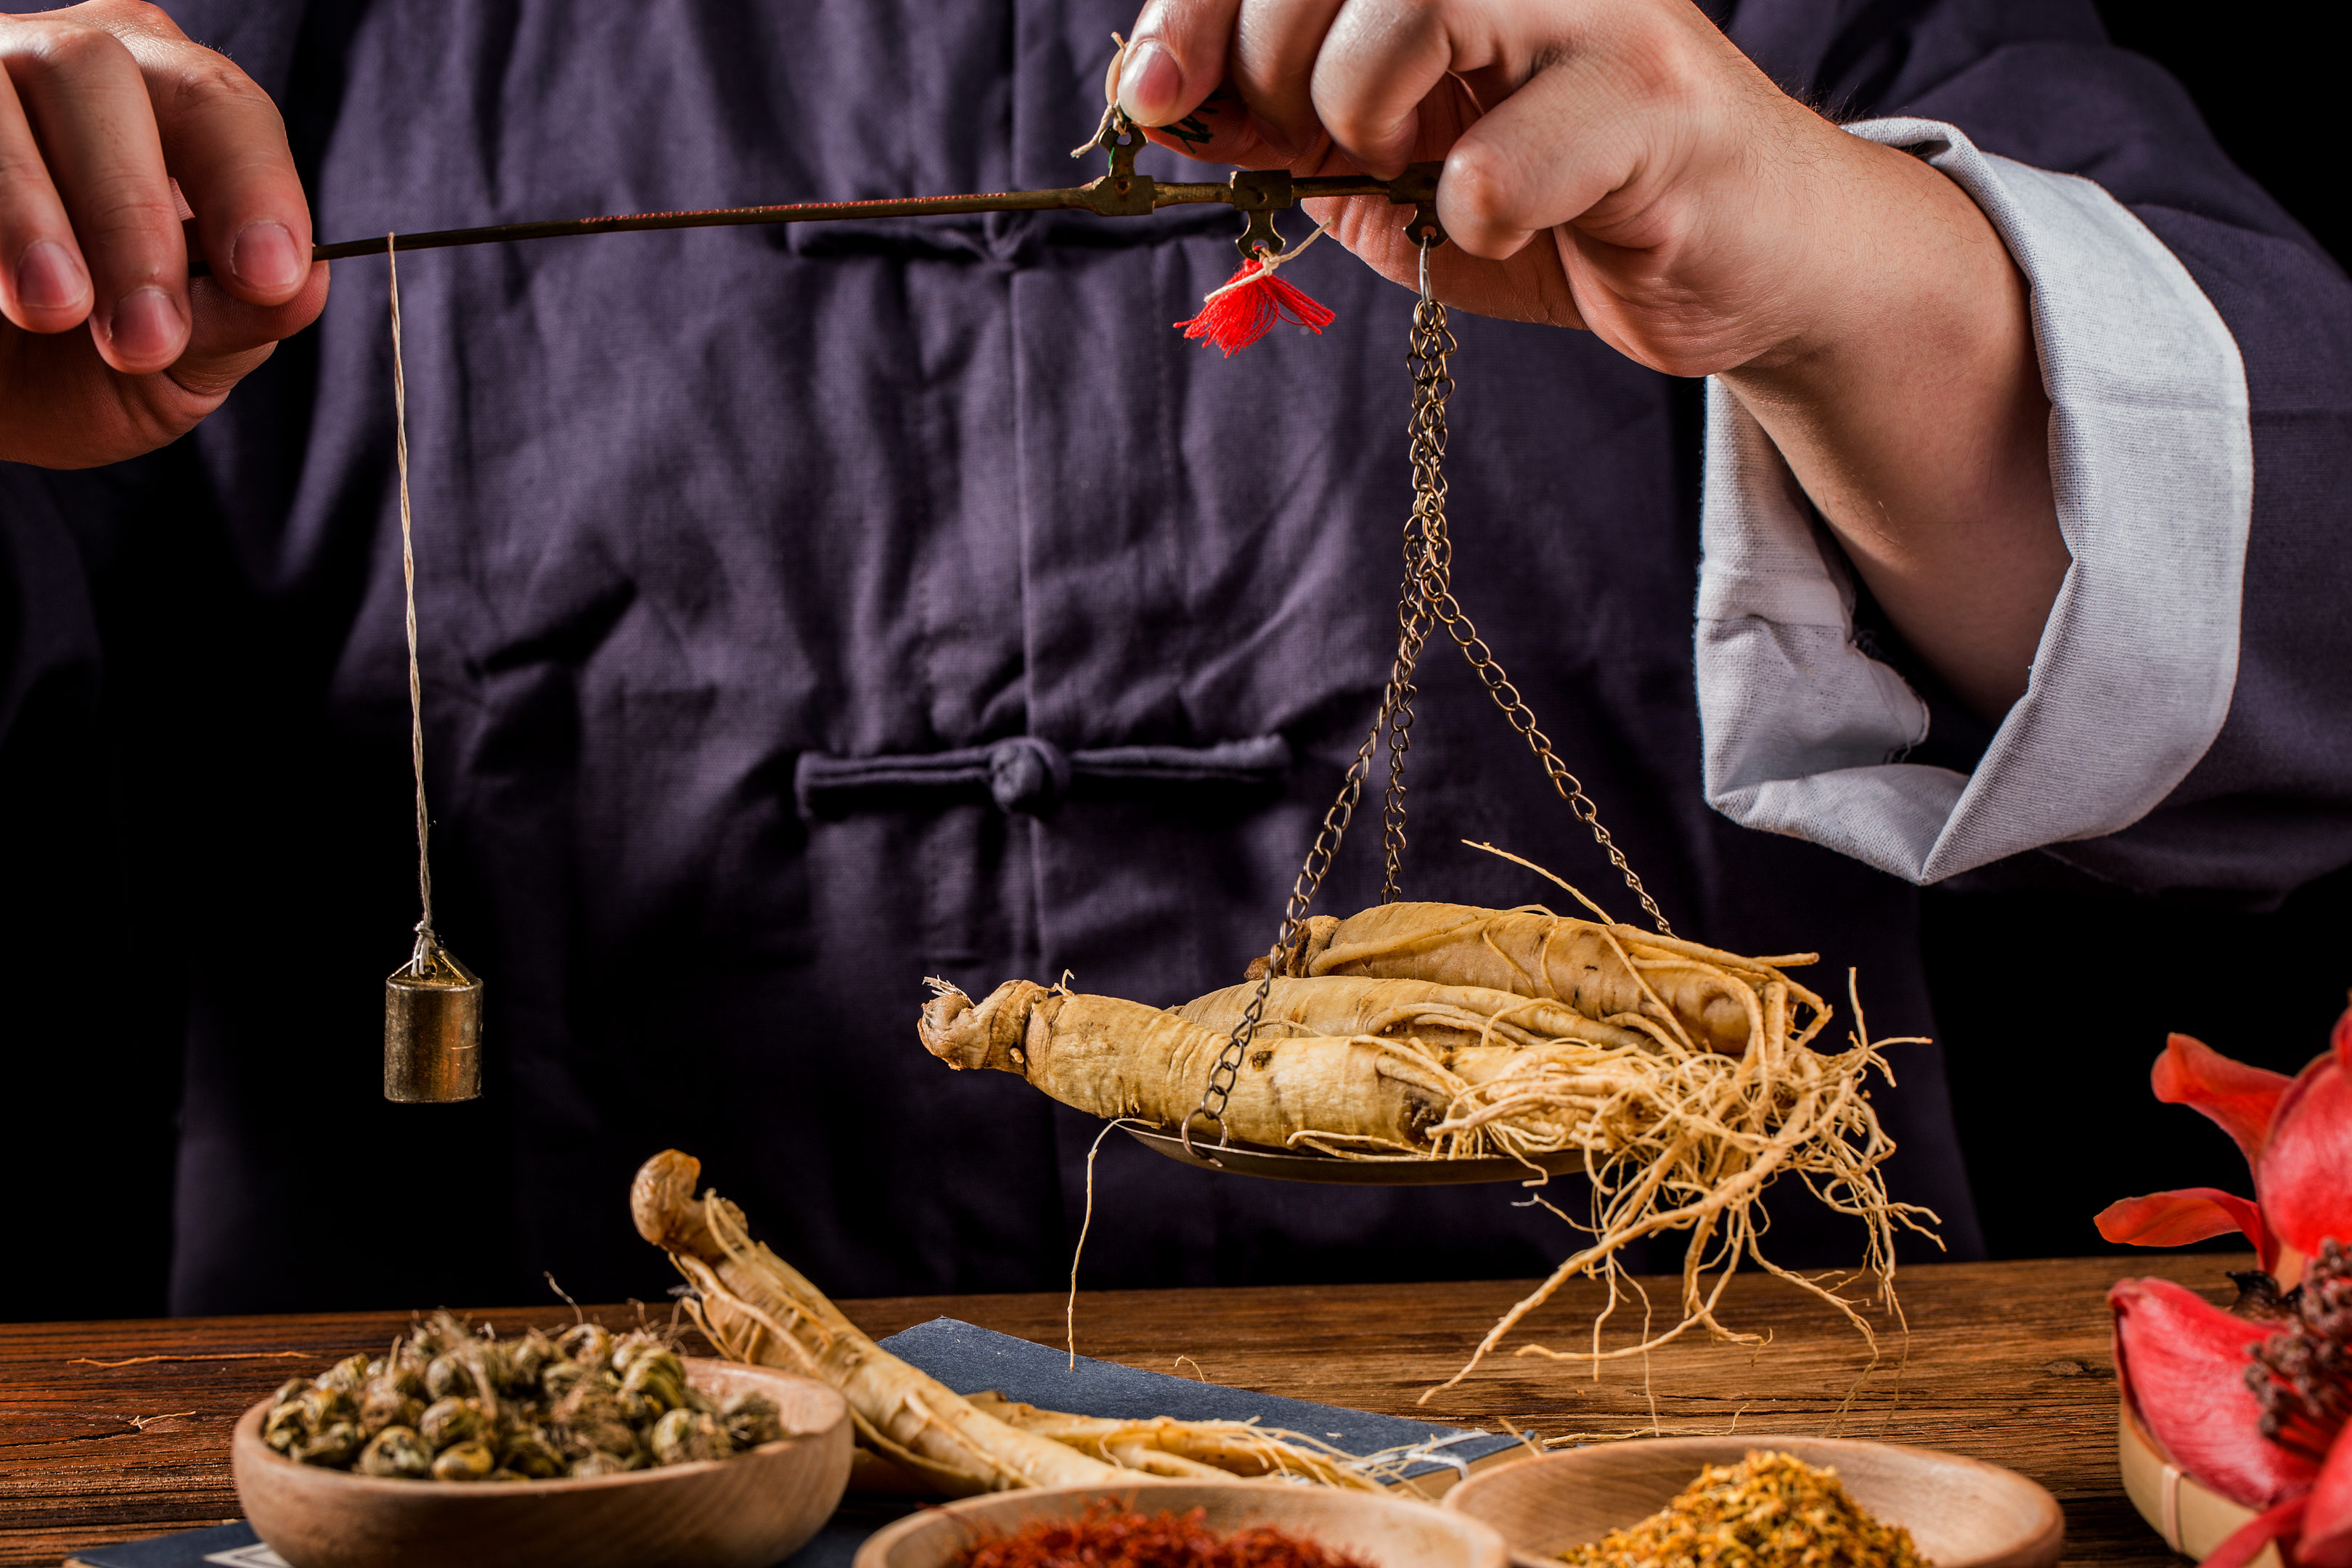 Red ginseng is used in traditional medicines.